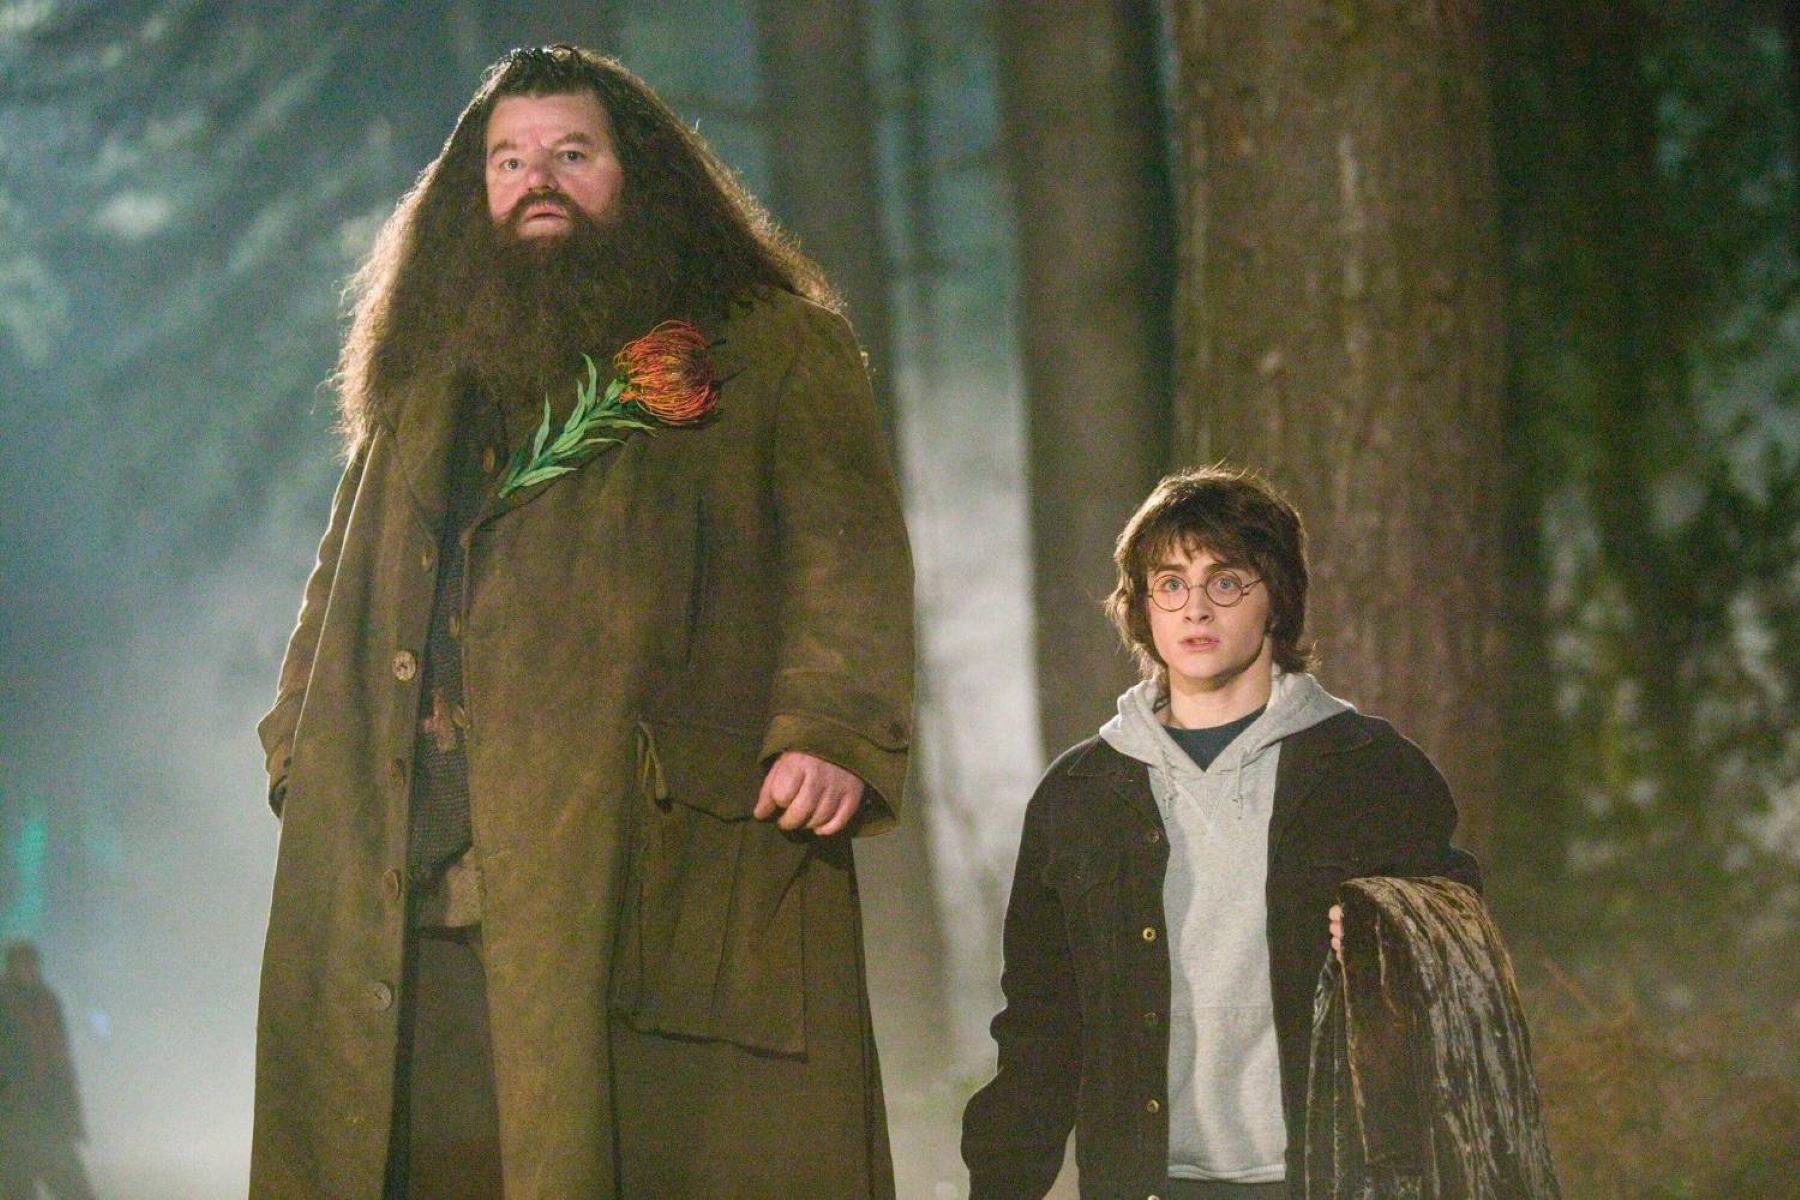 The Mind-Blowing Movie Magic Behind Hagrid's Gigantic Size In Harry Potter Revealed!